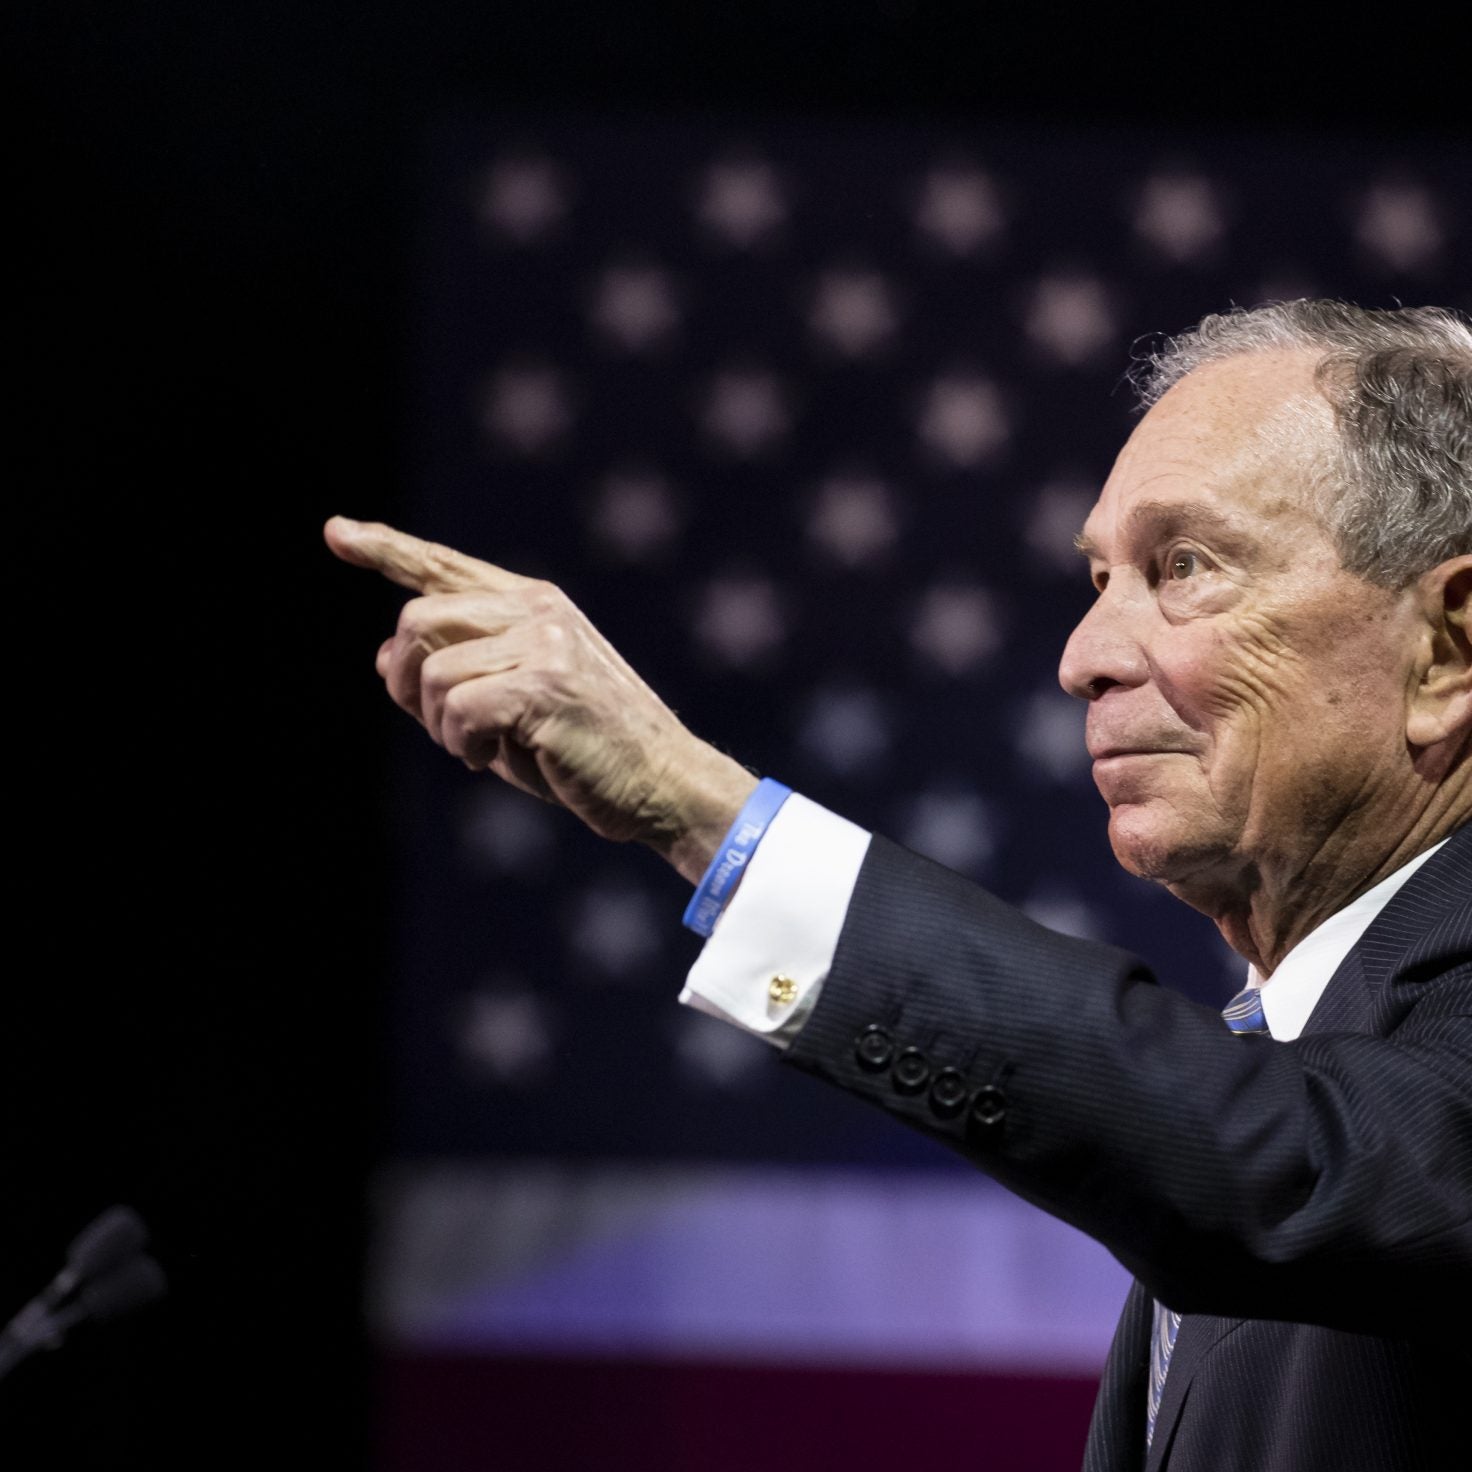 Michael Bloomberg Qualifies For His First Democratic Debate